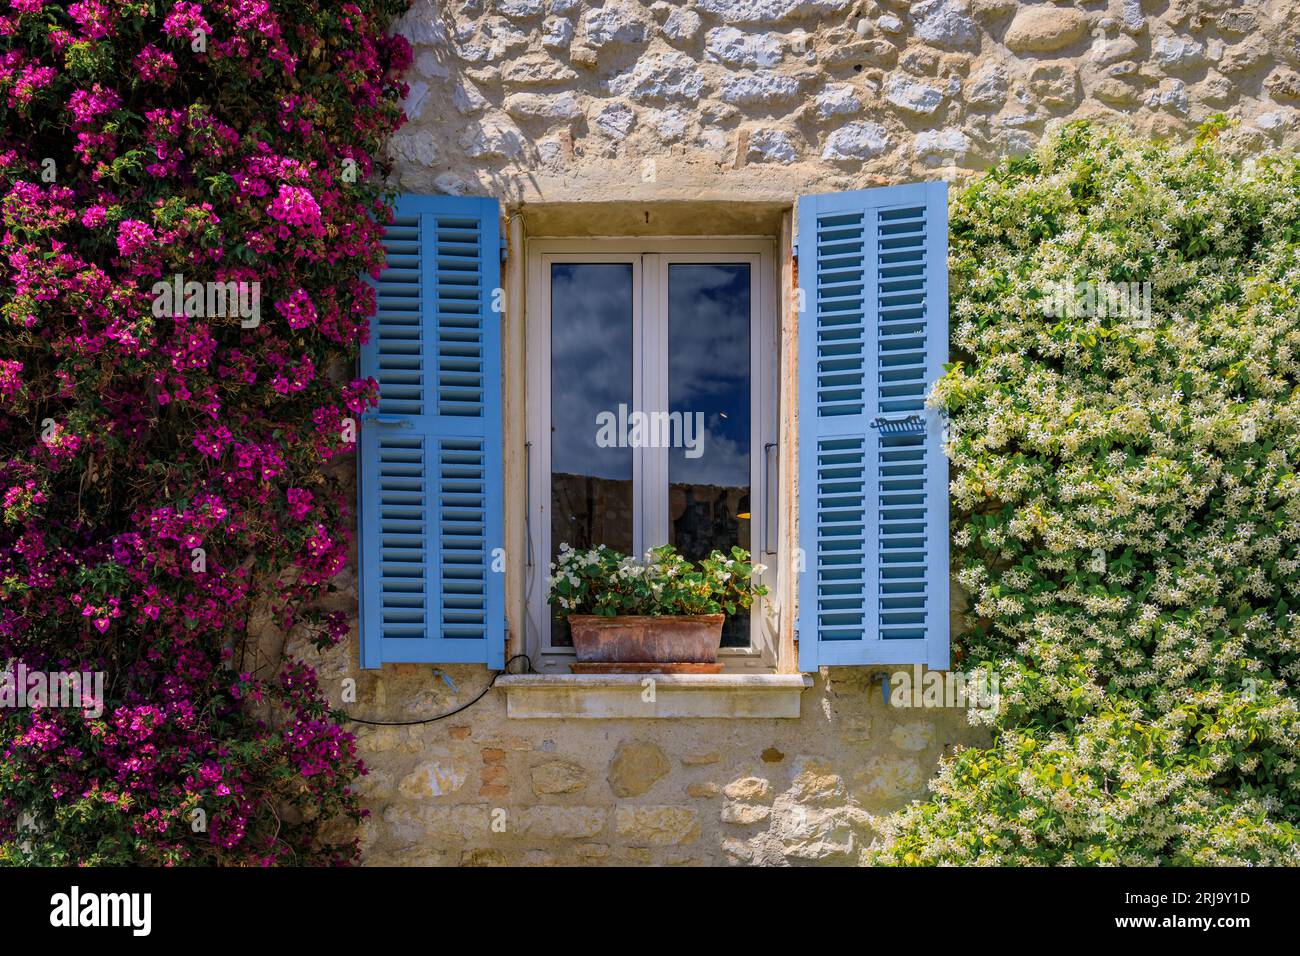 Bougainvilia and jasmine flower vines framing an old stone house window in the medieval town of Saint Paul de Vence, French Riviera, South of France Stock Photo